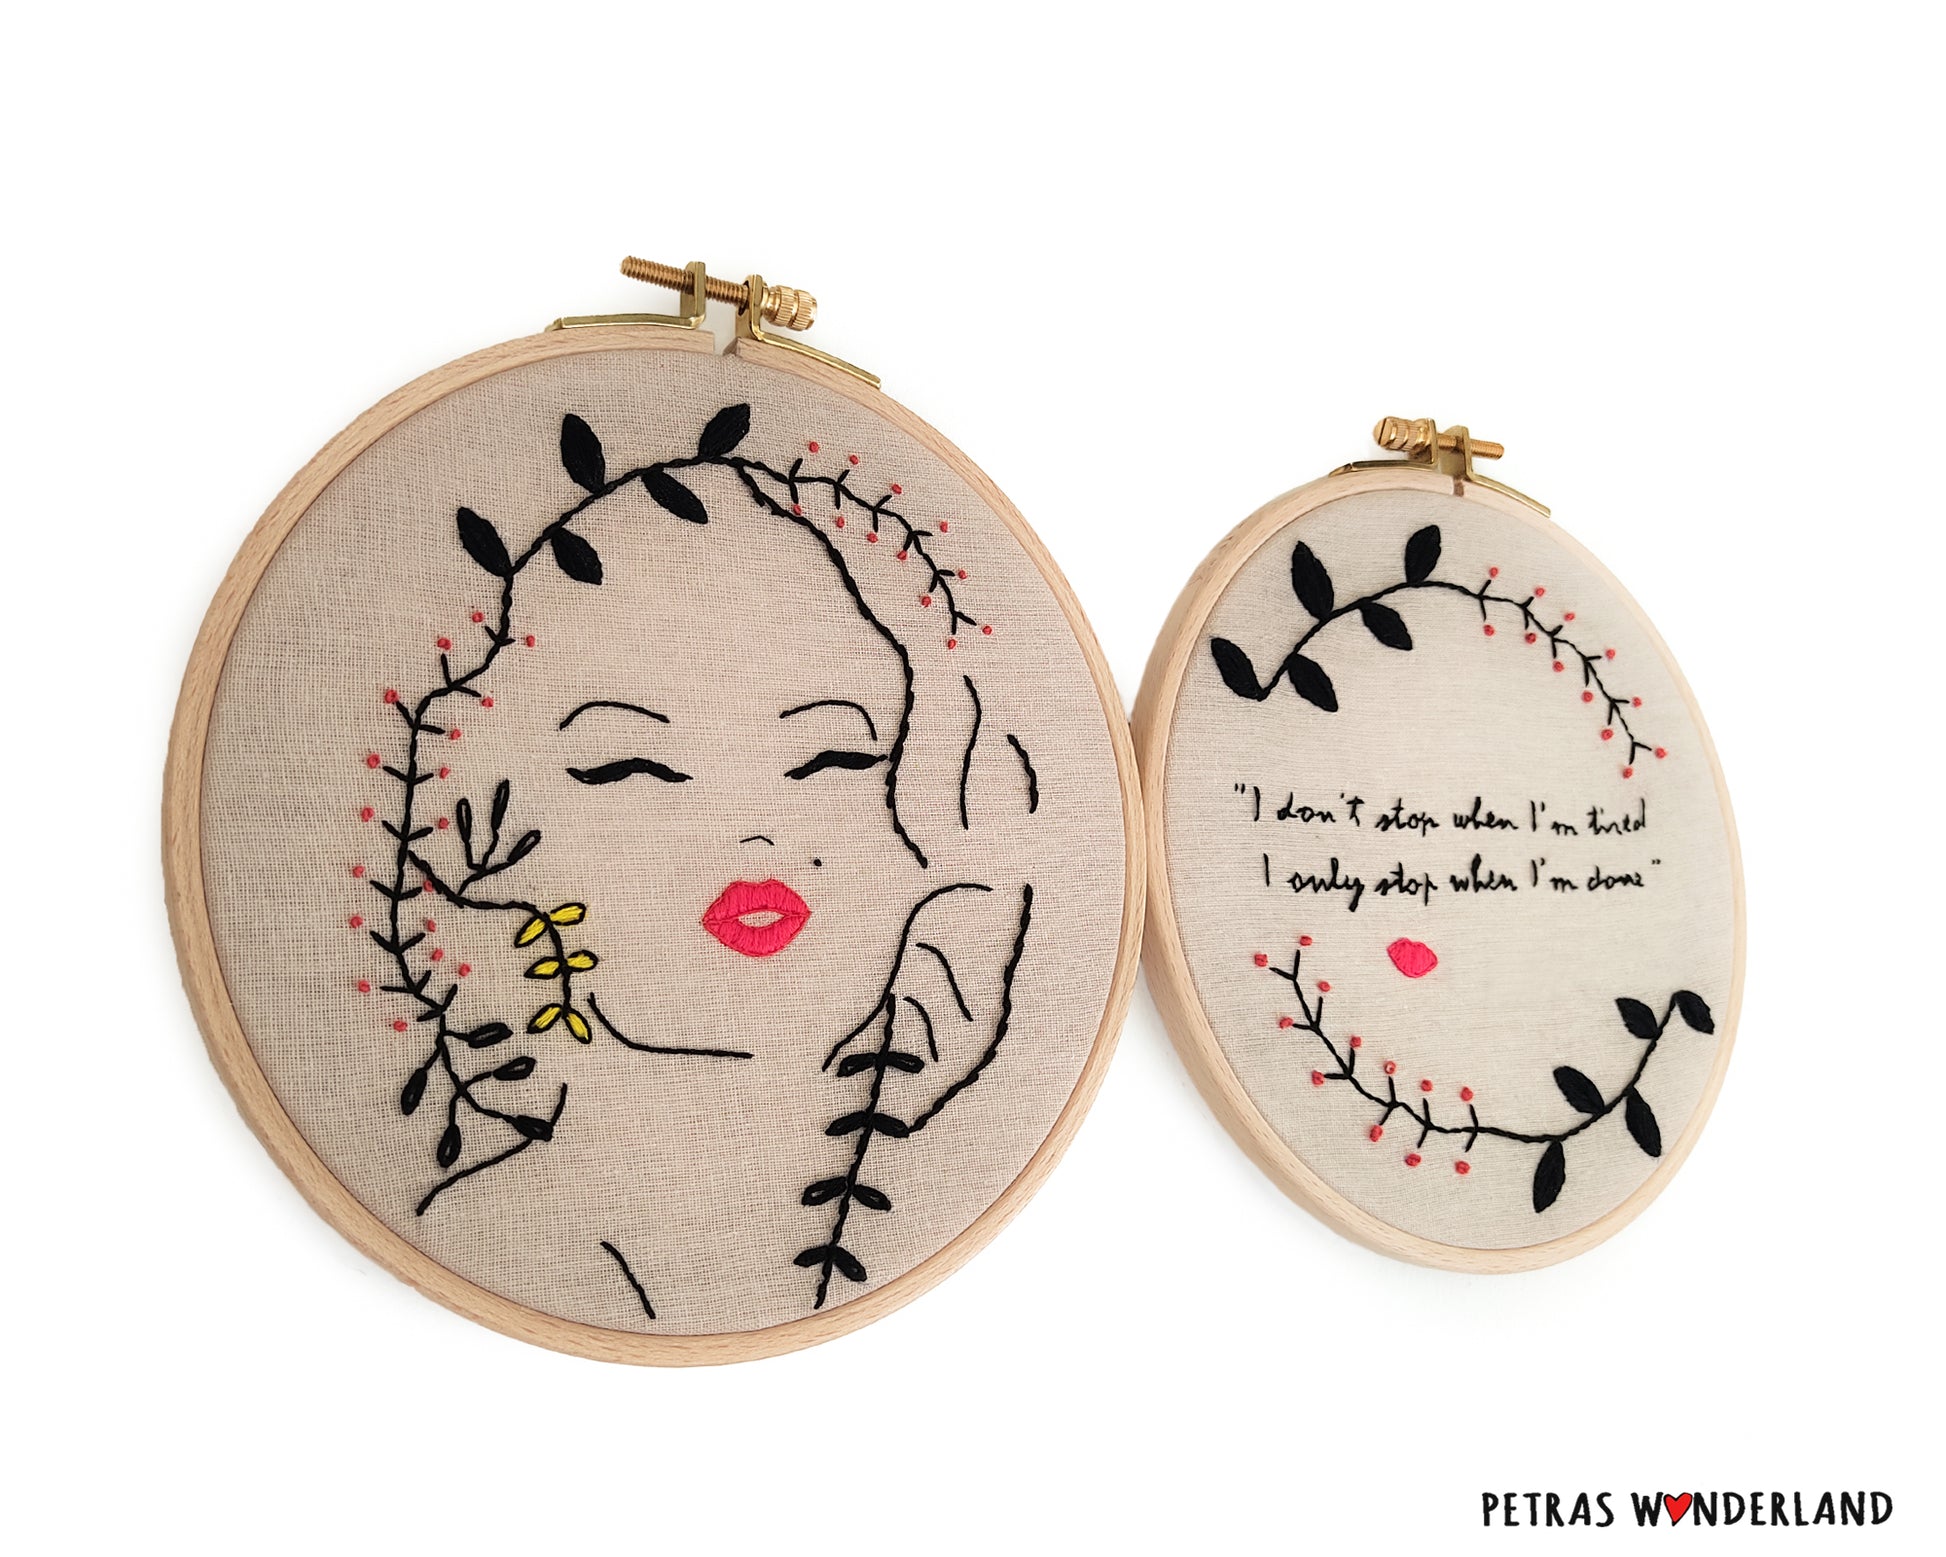 Special Offer: Actress Portrait and Quote  - PDF embroidery pattern and tutorial 02